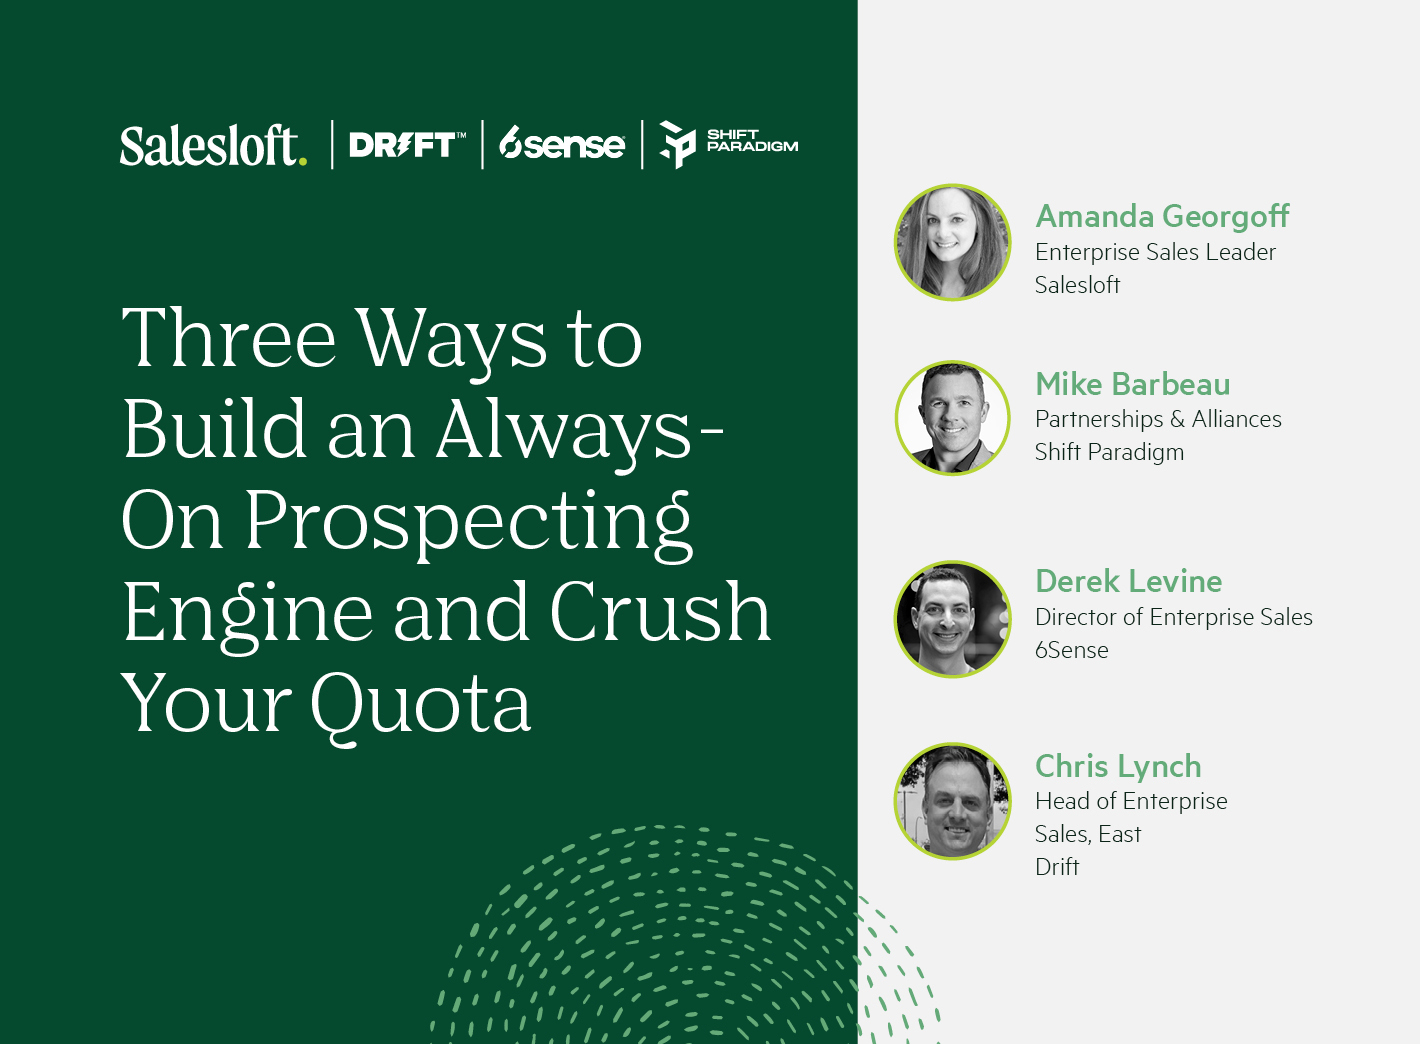 3 Ways to Build an Always-On Prospecting Engine and Crush Your Quota